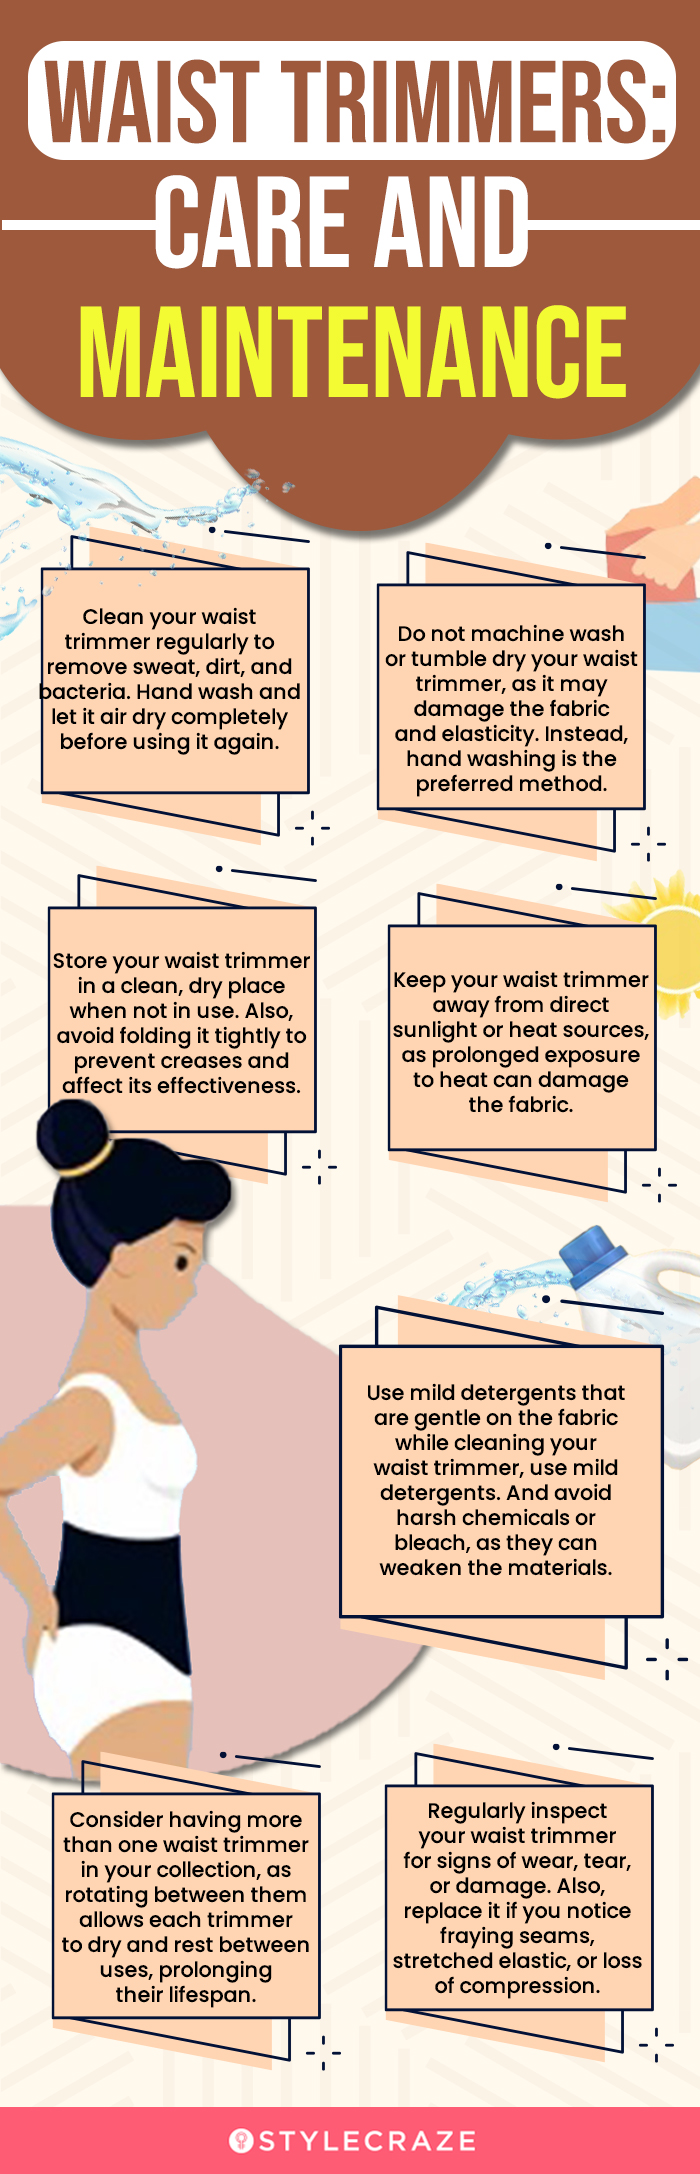 Waist Trimmer Care and Maintenance: 7 Essential Tips (infographic)